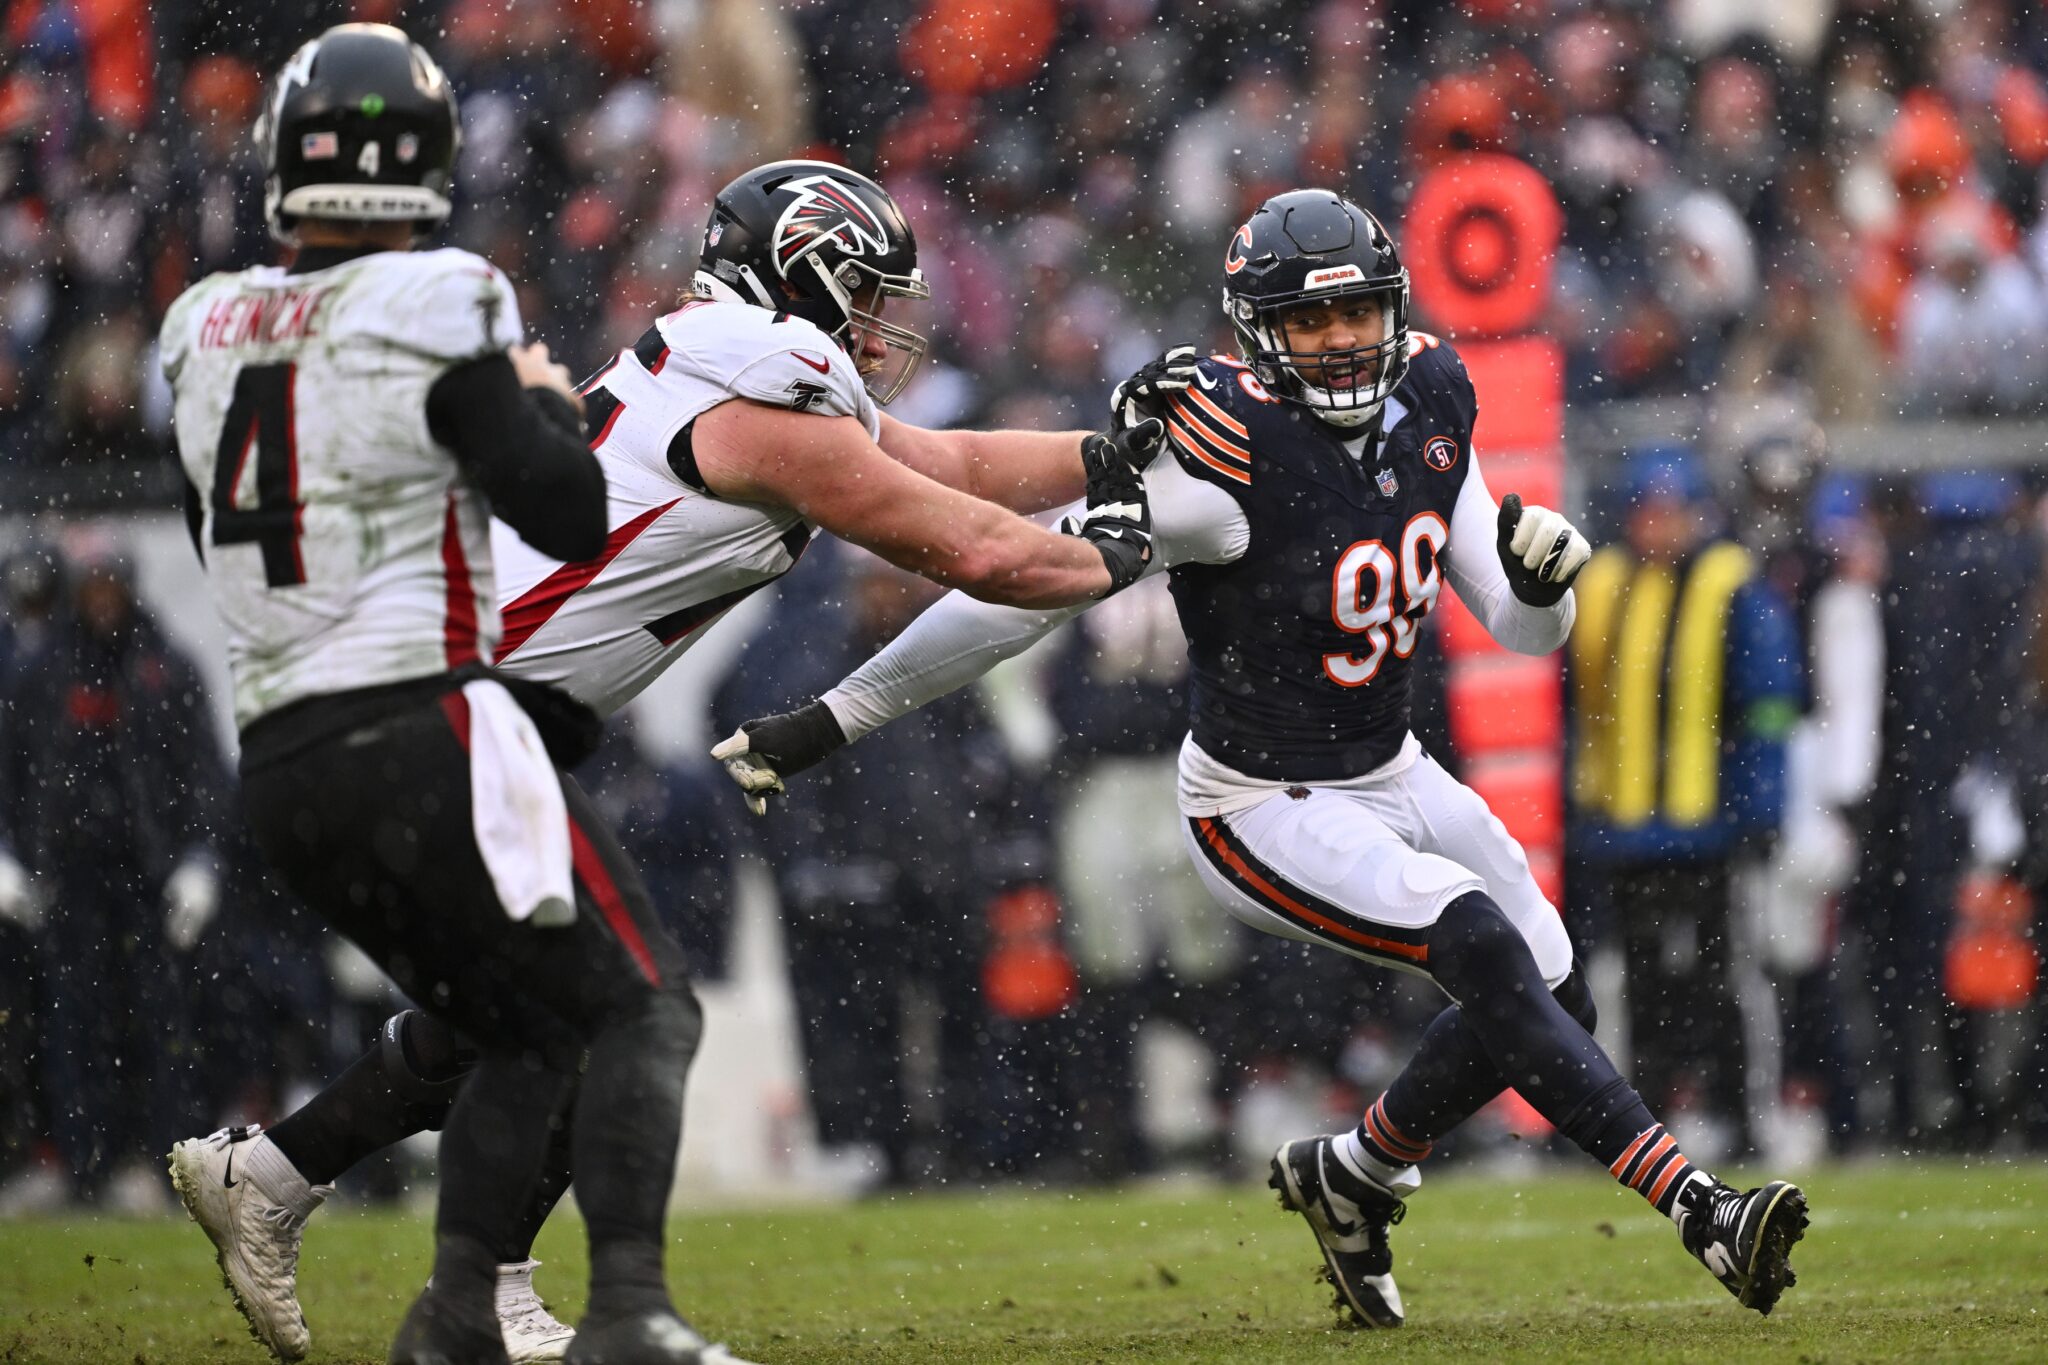 Bears' Player Sets NFL Record Leading 2 Teams In Sacks